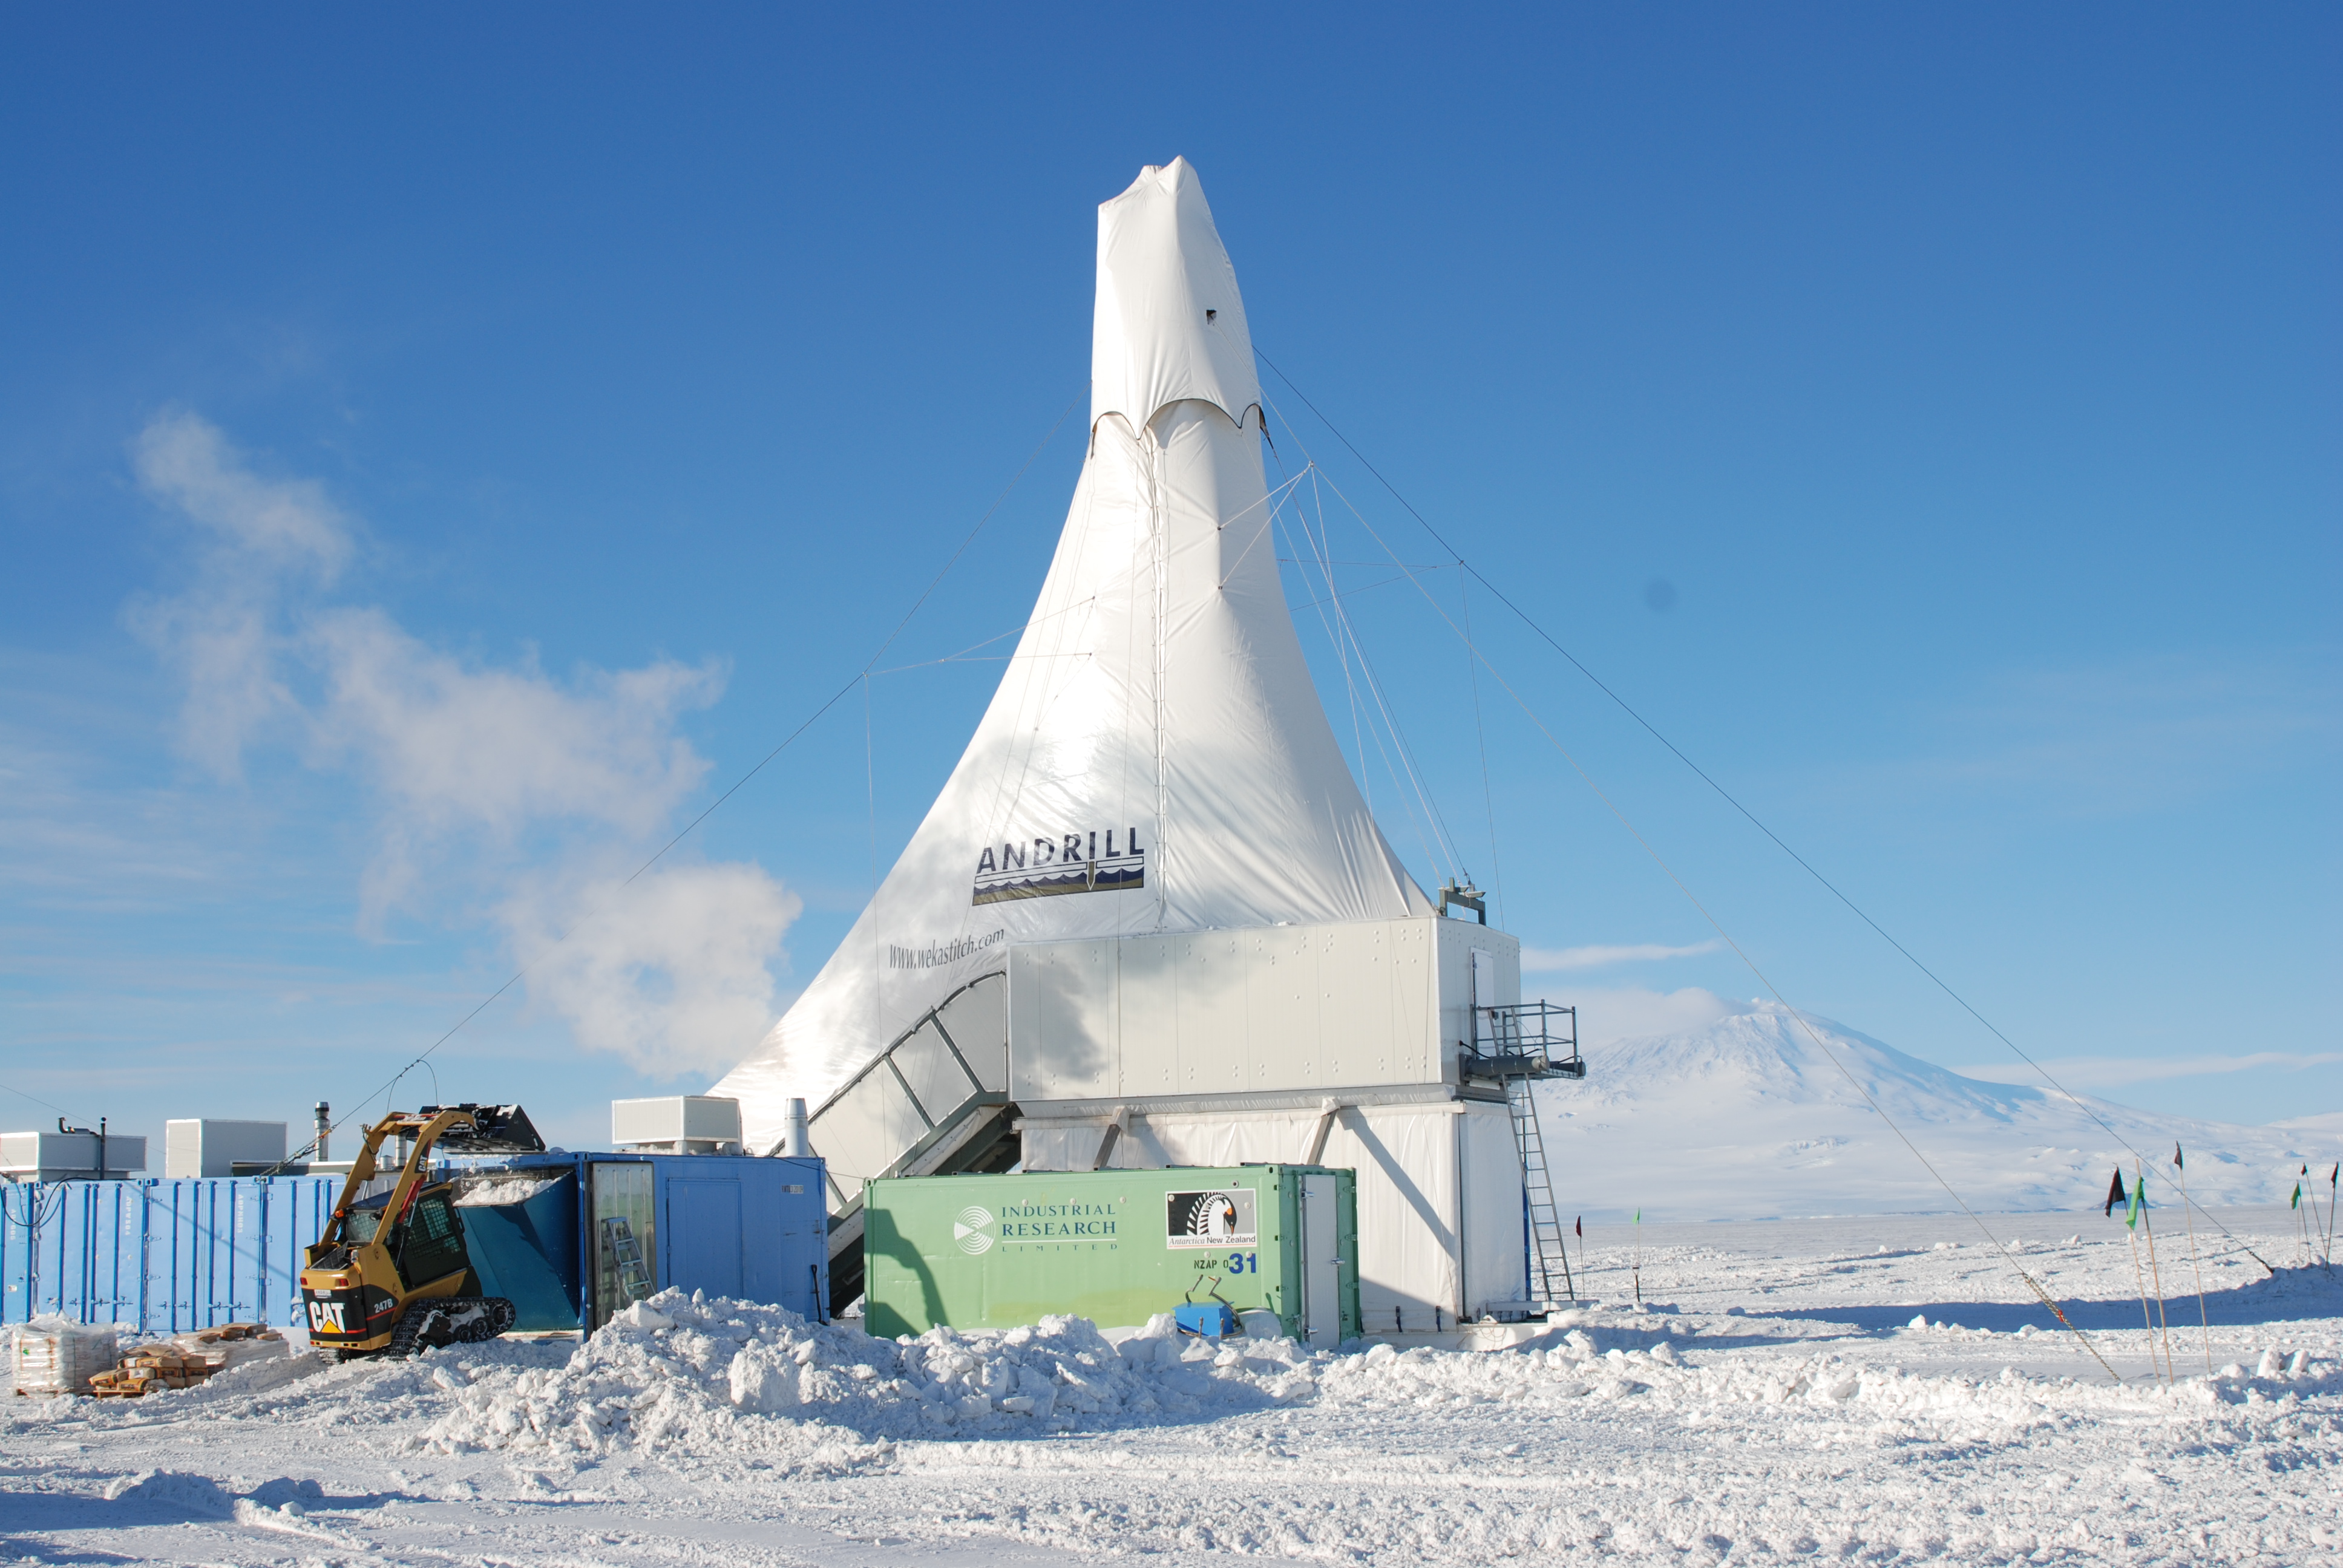 The ANDRILL project on the Ross Ice Shelf